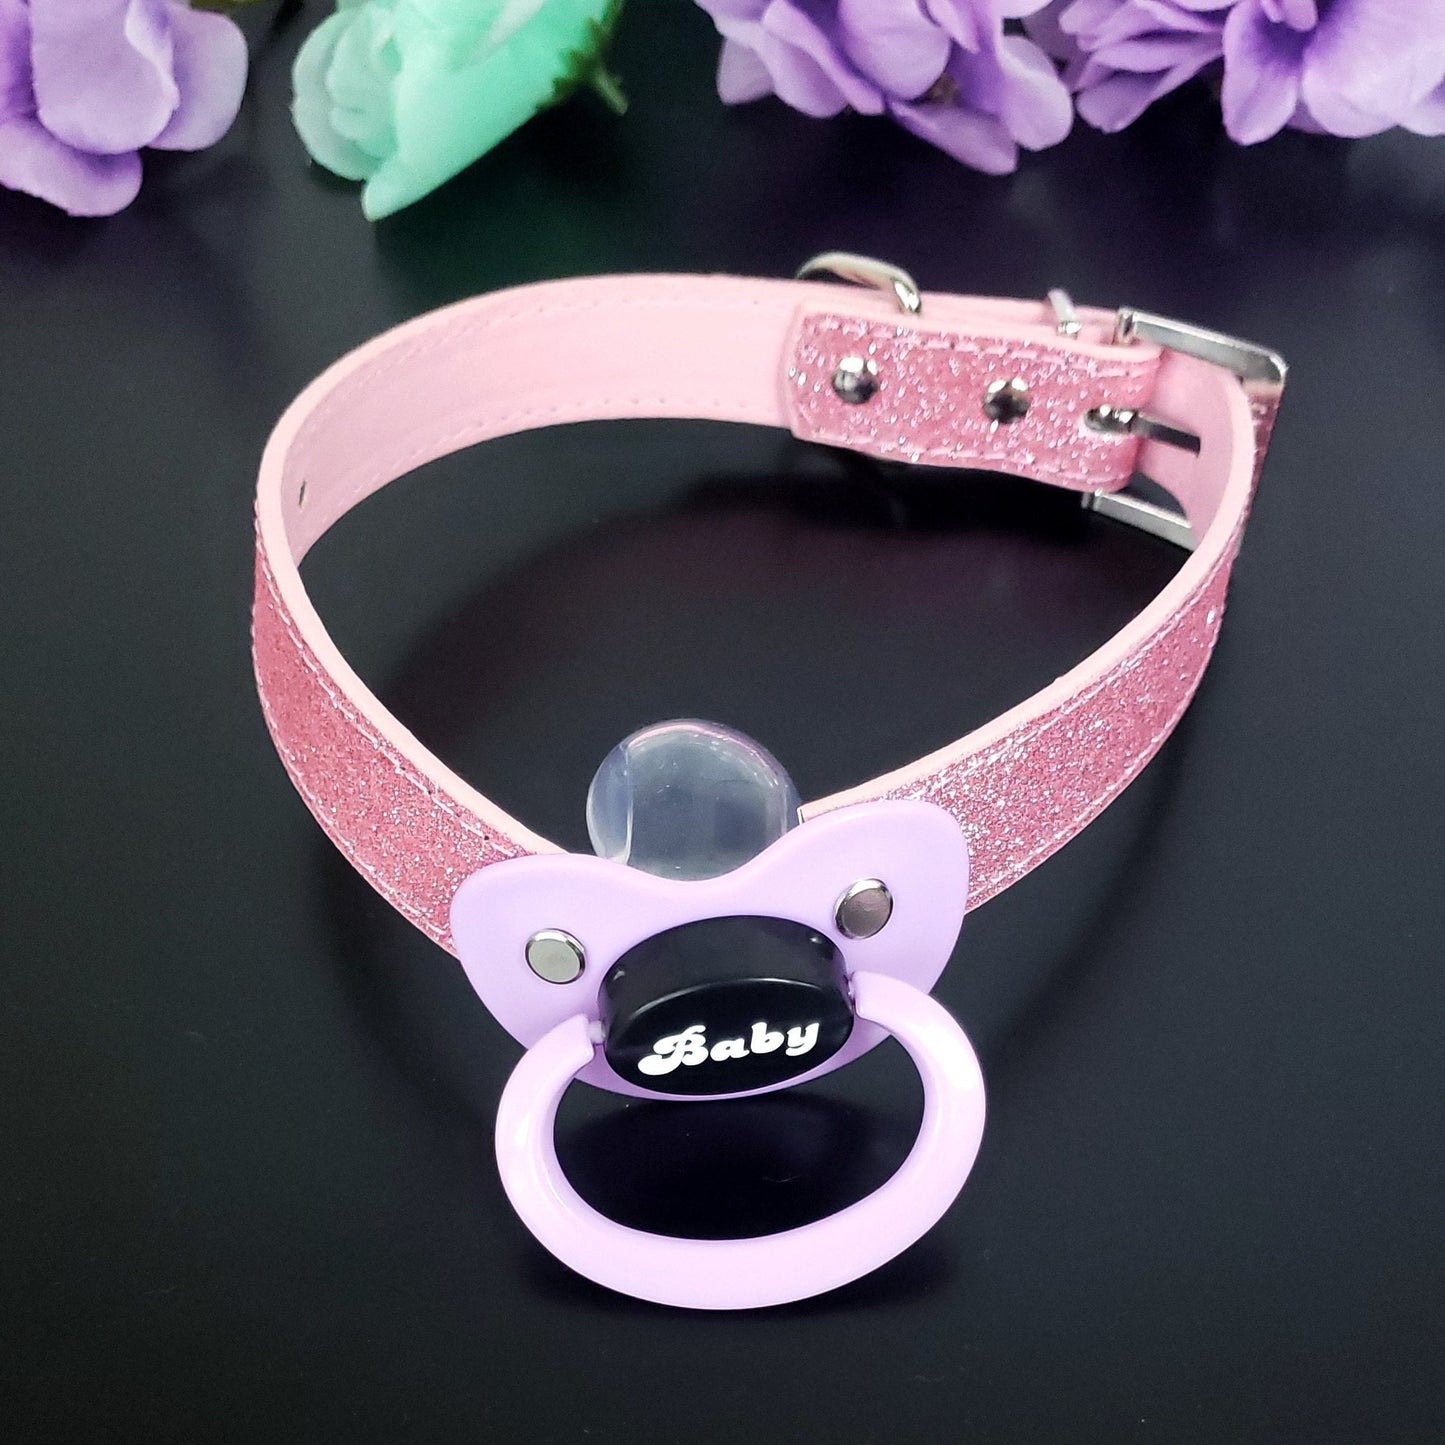 Baby Adult Pacifier Gag